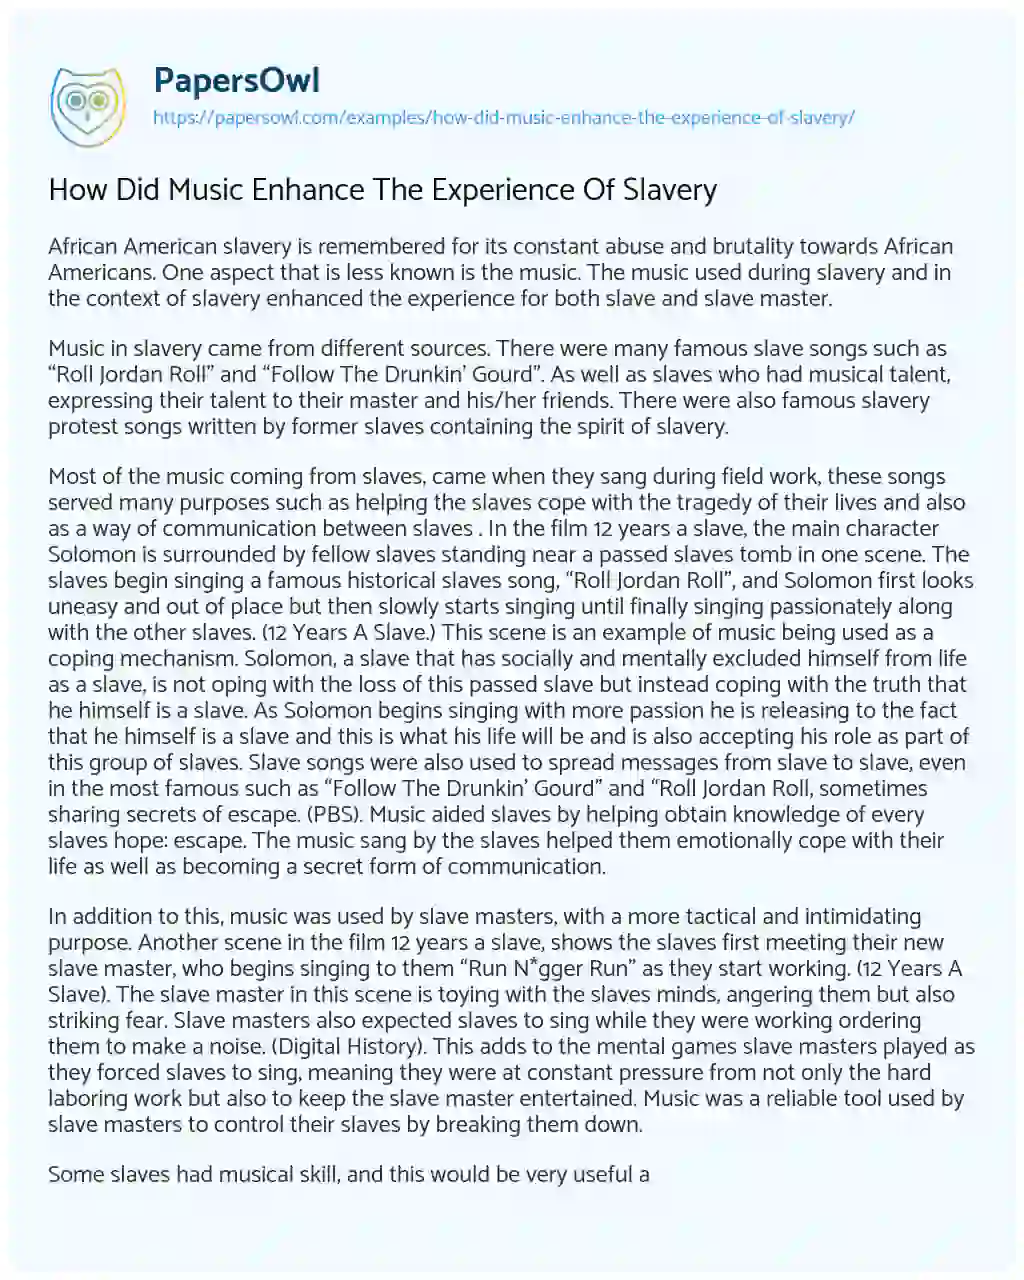 How did Music Enhance the Experience of Slavery essay